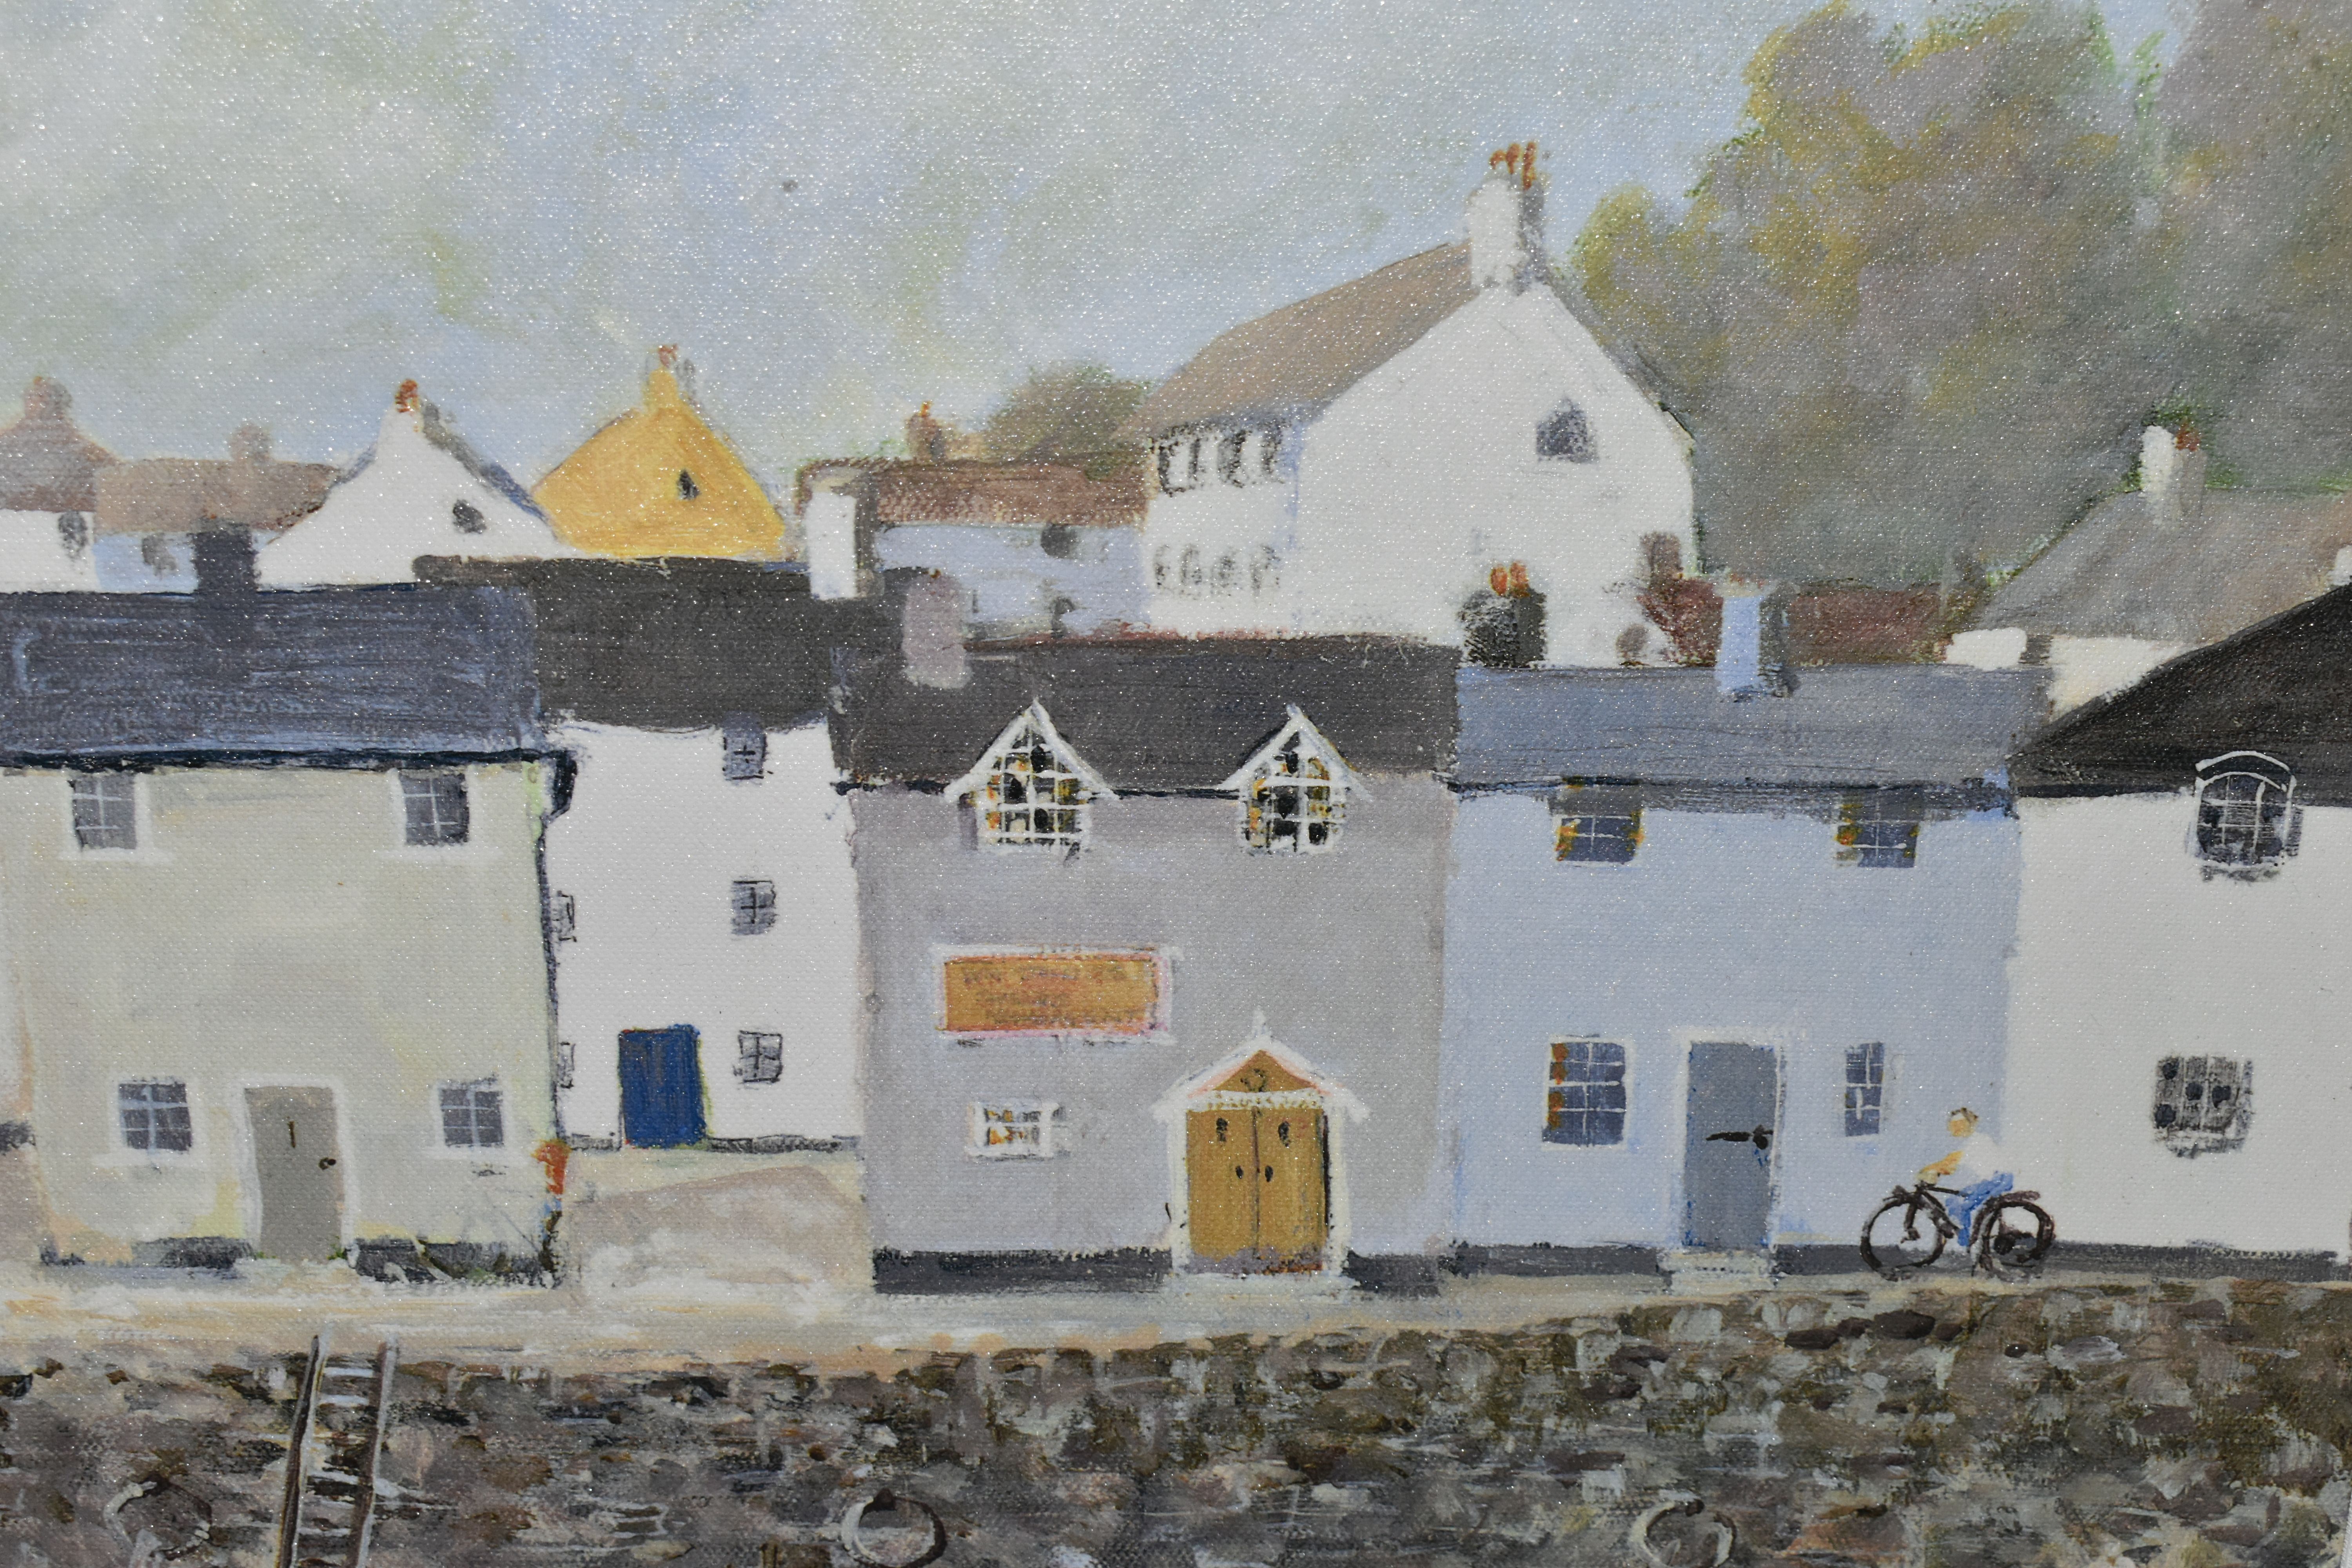 TWO DECORATIVE WALL ART PRINTS, comprising 'Morning Sands' by Anthony Waller depicting cottages - Image 6 of 6